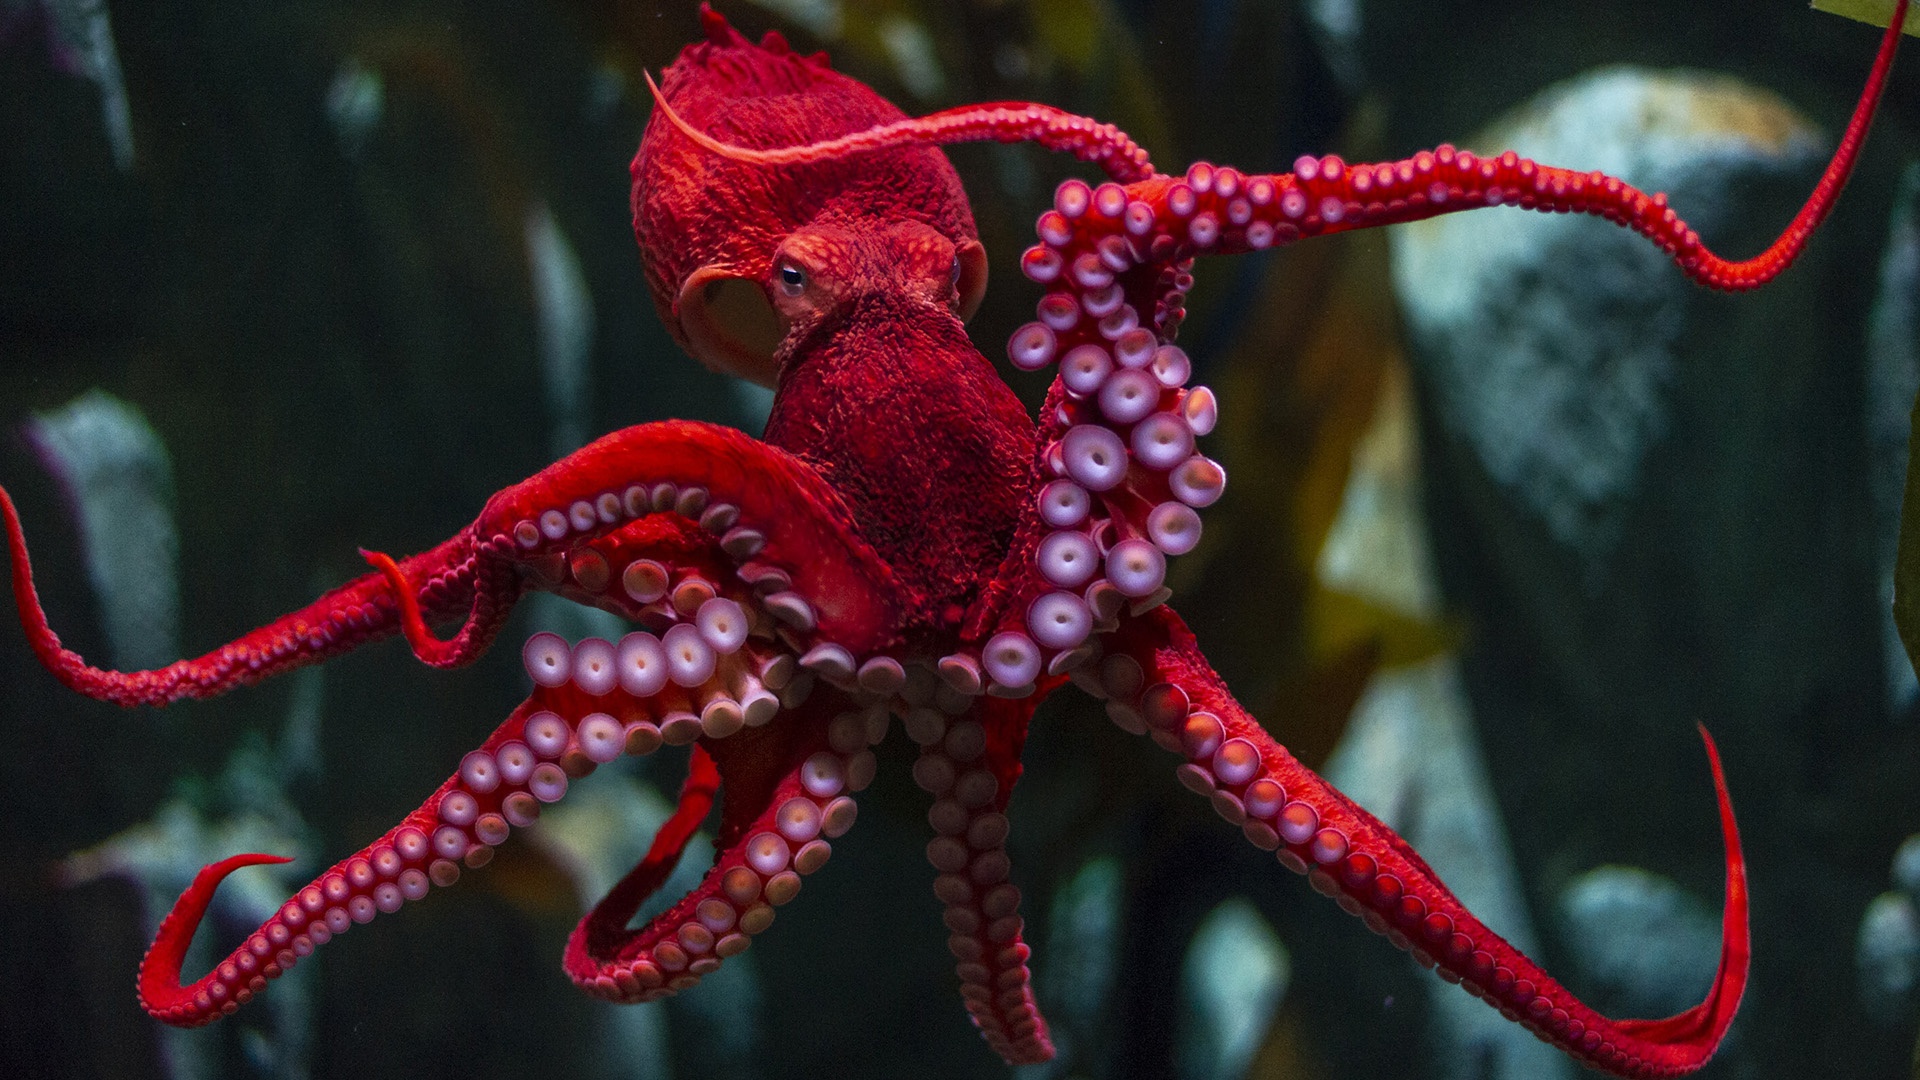 A Giant Pacific Octopus